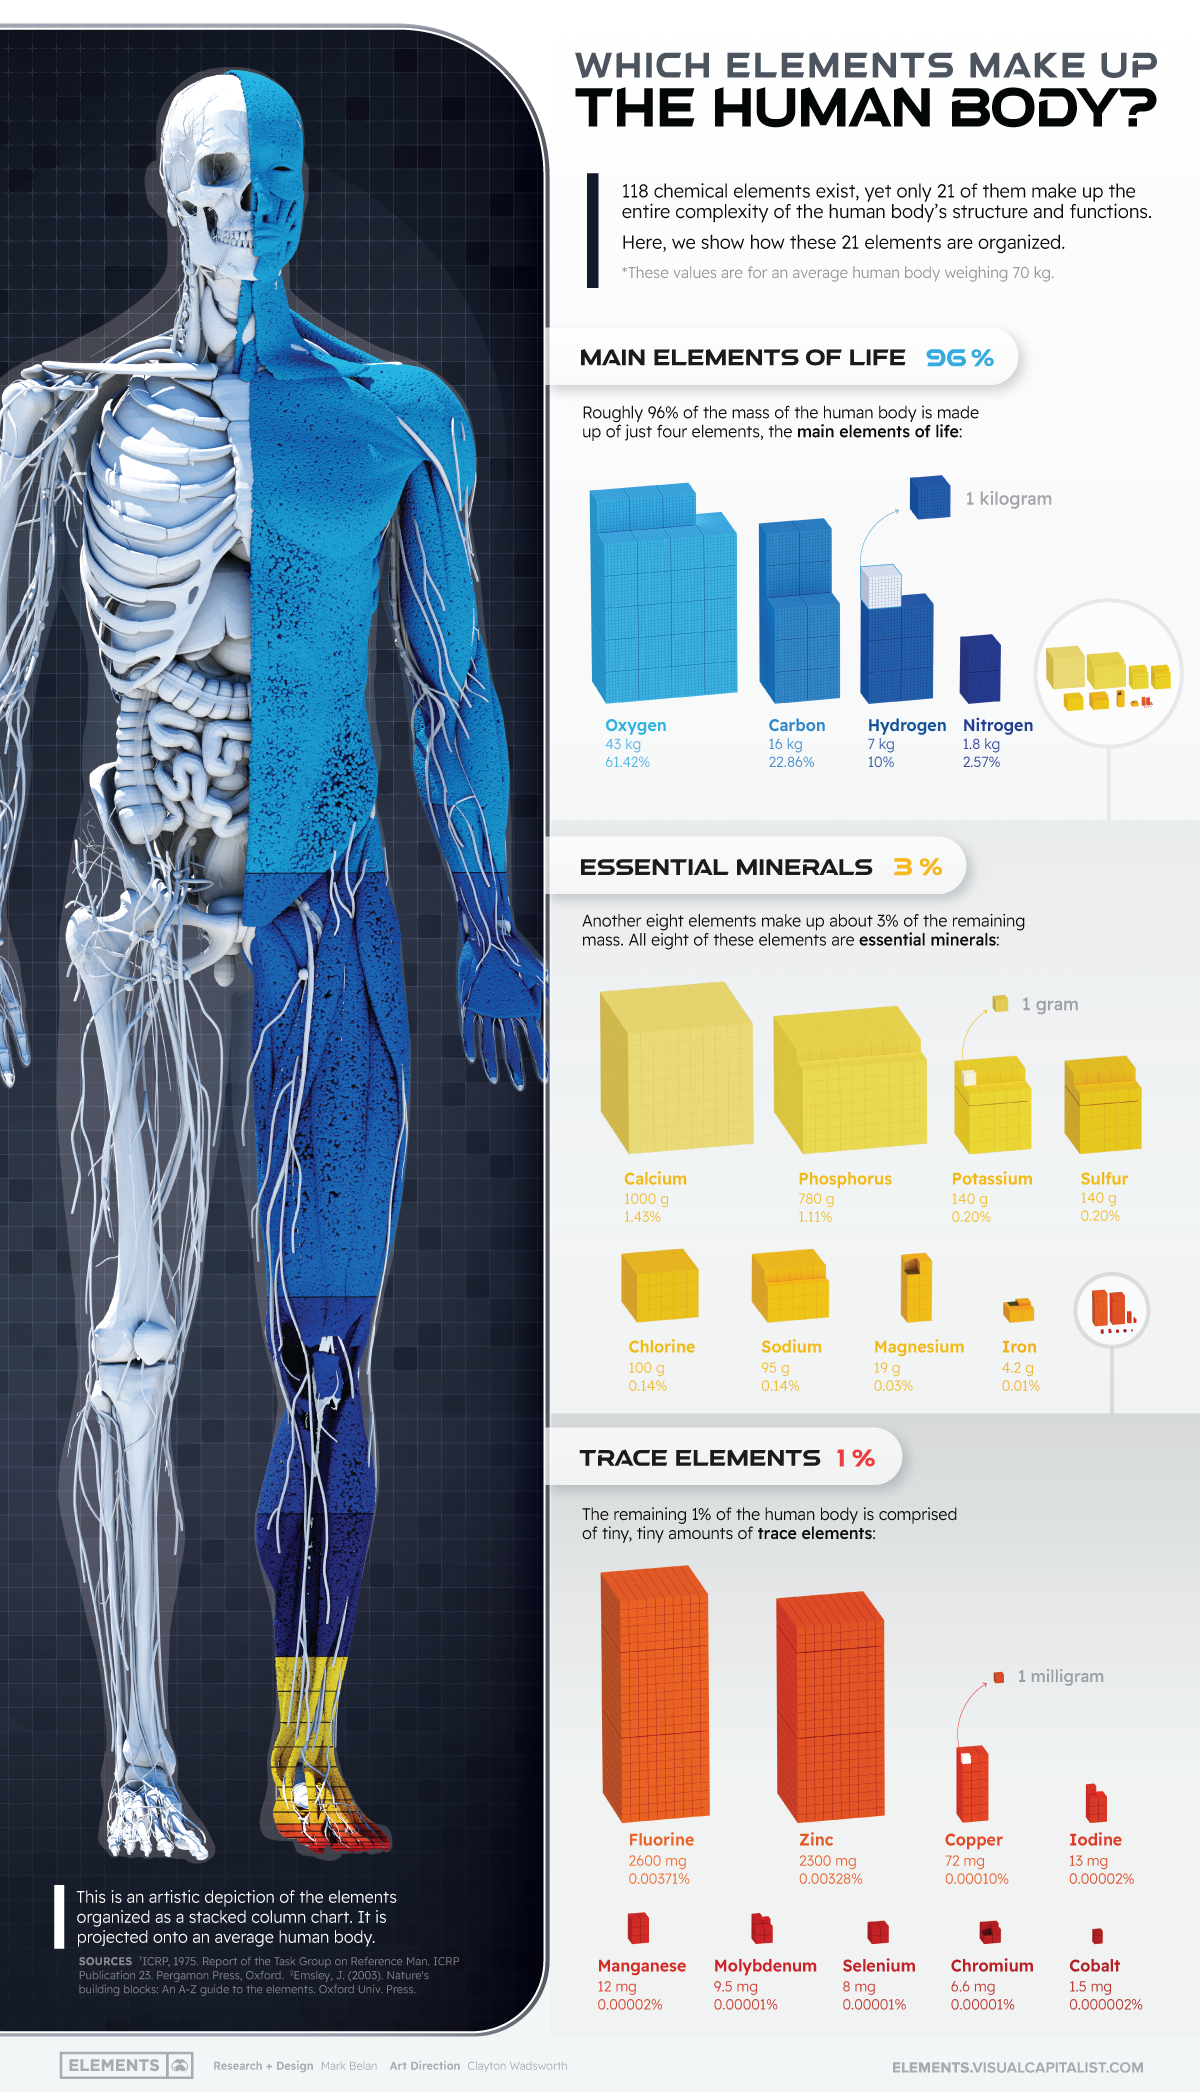 The Elemental Composition of the Human Body